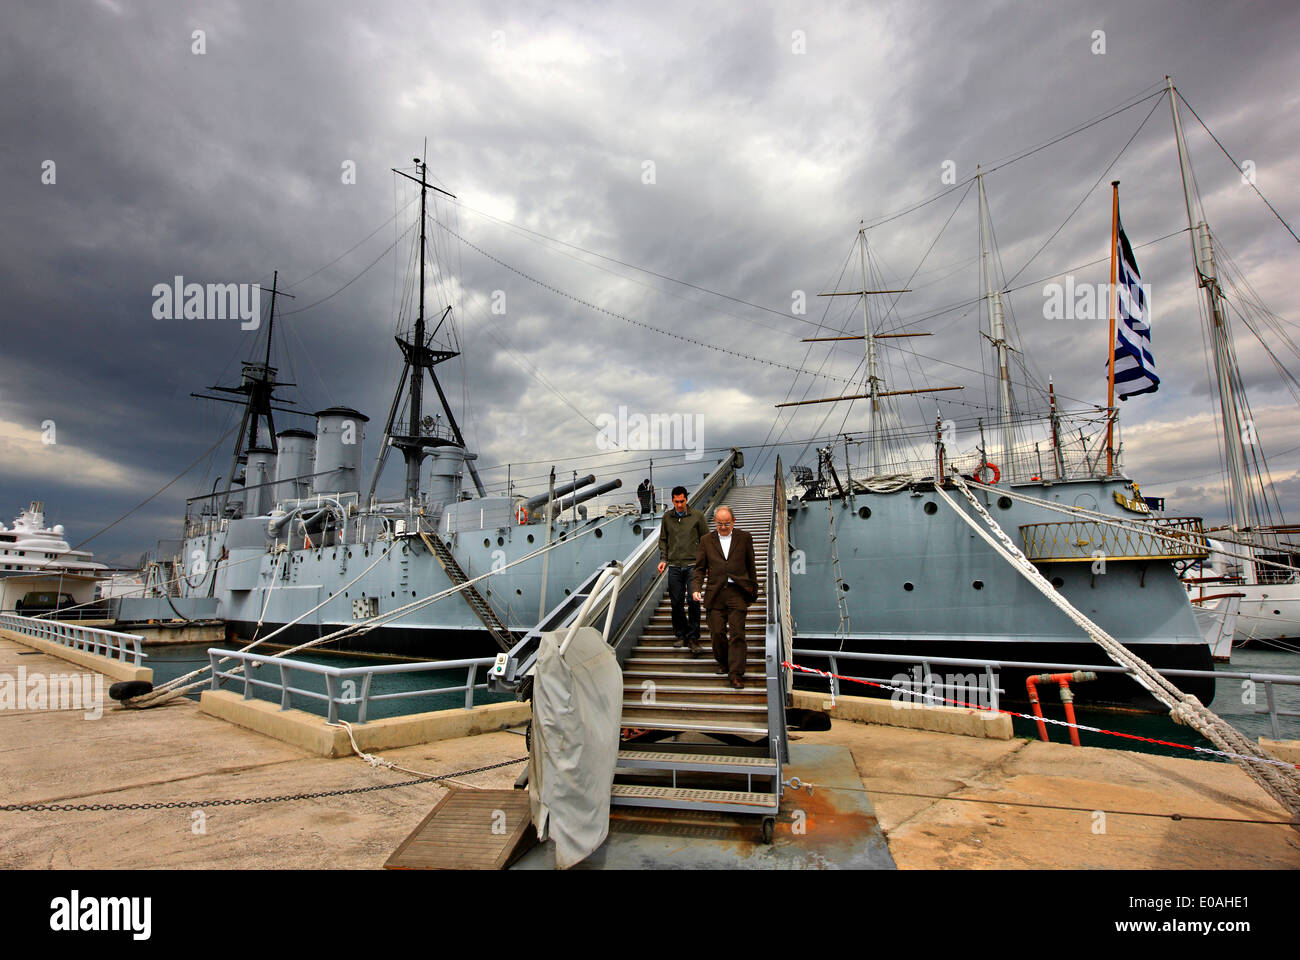 The Floating Naval Museum 'AVEROF' You can find and visit it at the marina of Floisvos, in Palaio Faliro, Attica, Greece. Stock Photo